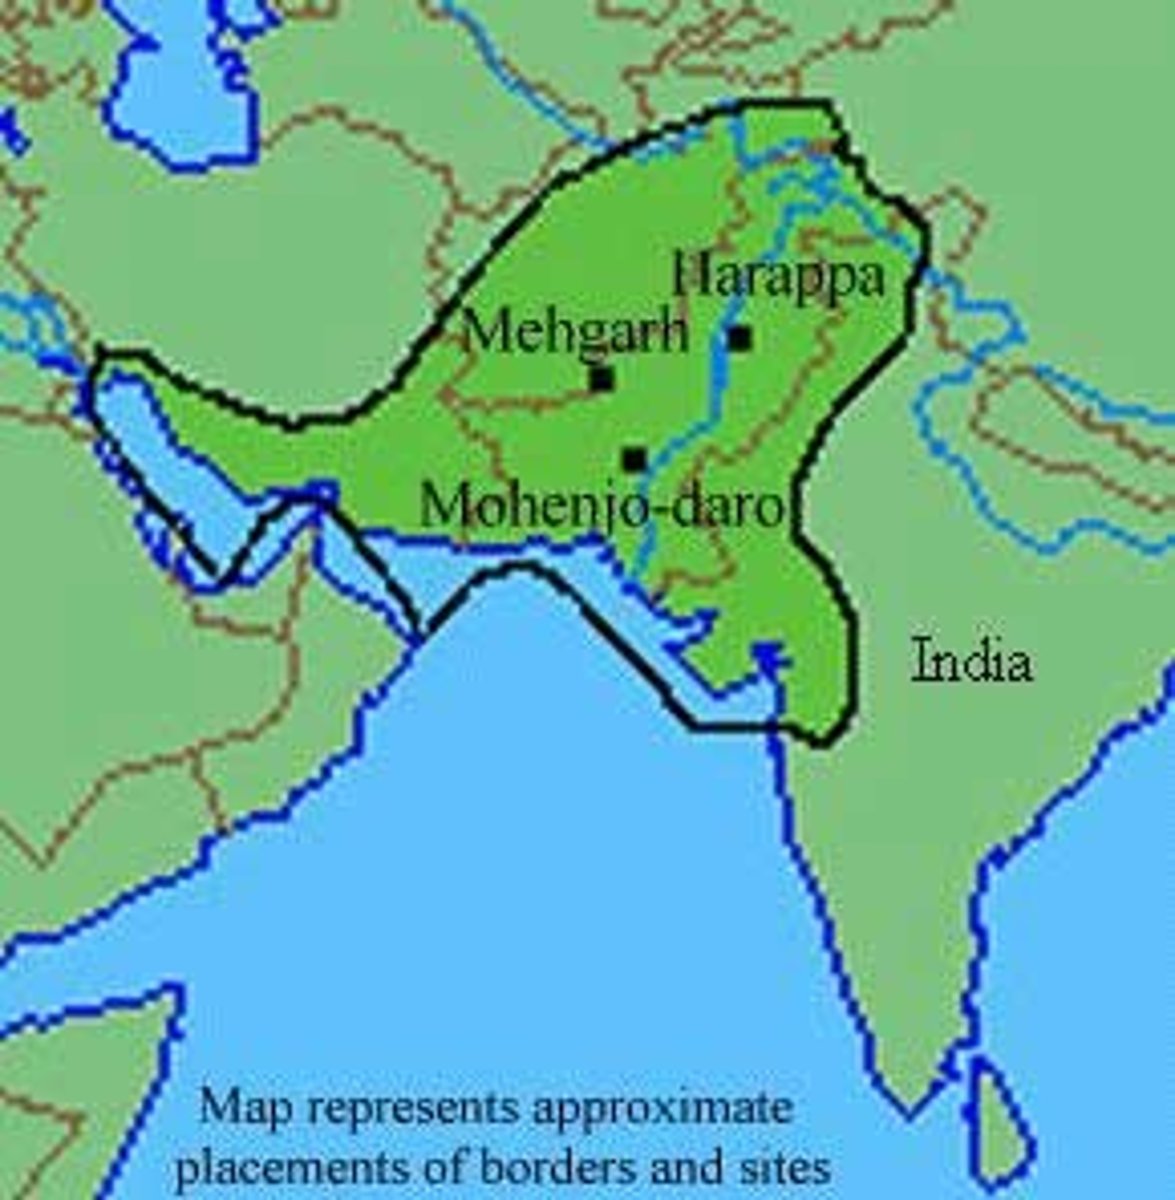 <p>3rd millennium BC, Elaborately planned cities, standardized measures, irrigated agriculture, written language, no temples kings etc., had a lot of land, no political hierarchy, was abandoned because of mass deforestation, low crop yields, famine, environmental deterioration, etc. their influence continued even to this day (i.e. yoga). Important because it shows how we developed in our cities and economy.</p>